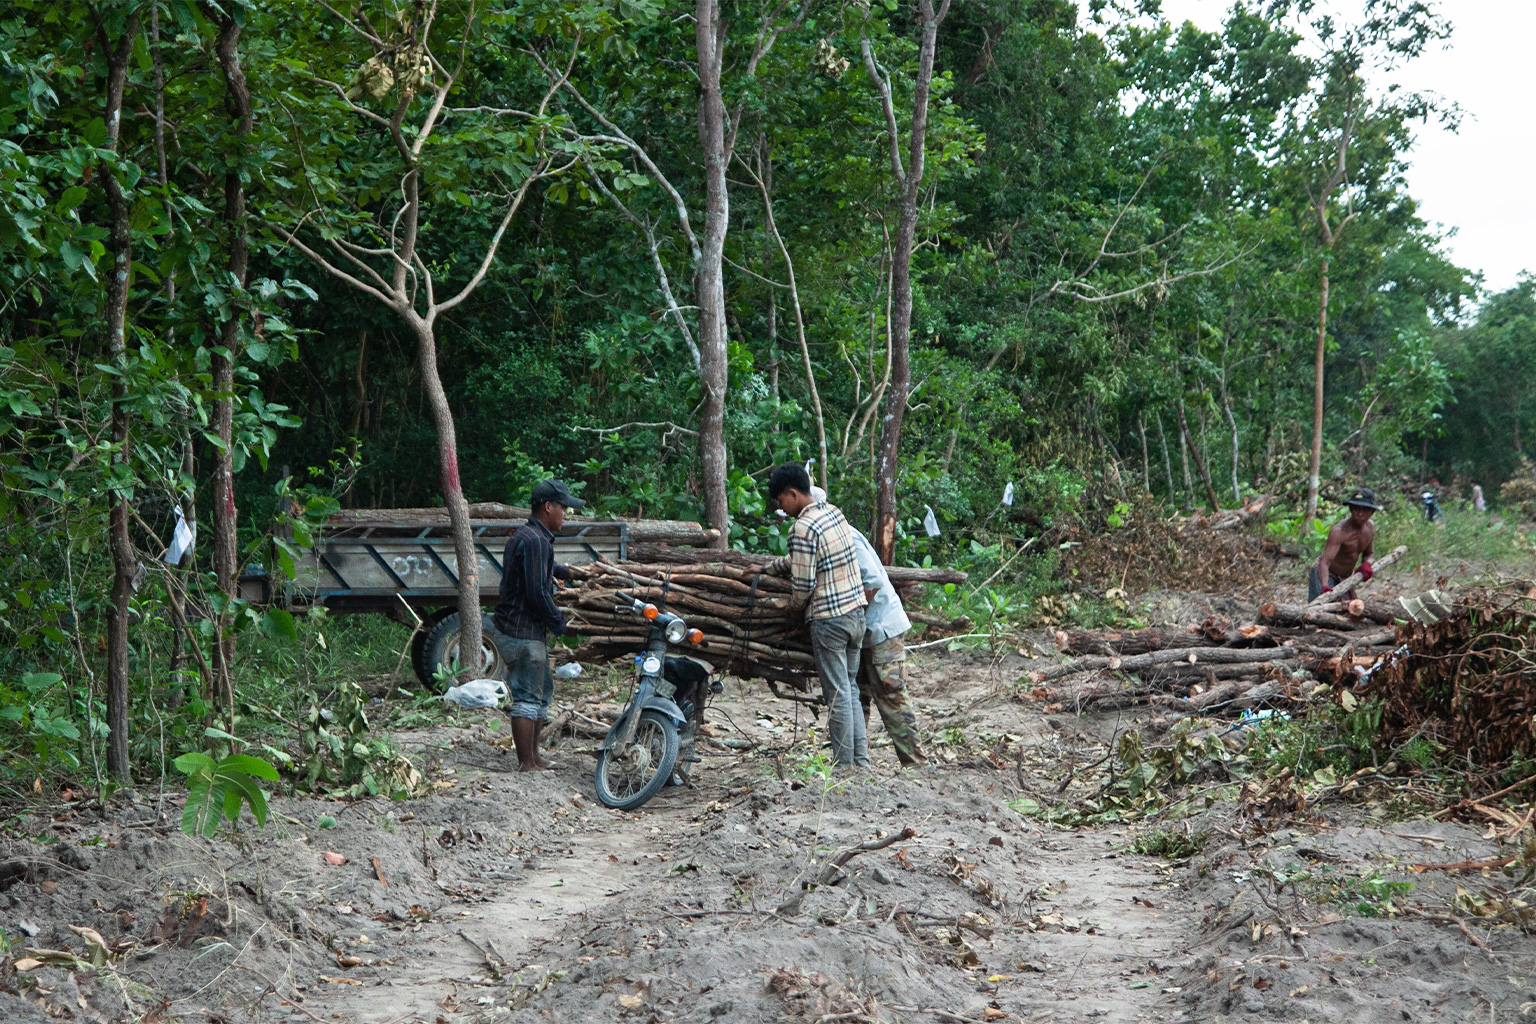 Local residents seemed more interested in scavenging free timber than planting new saplings.